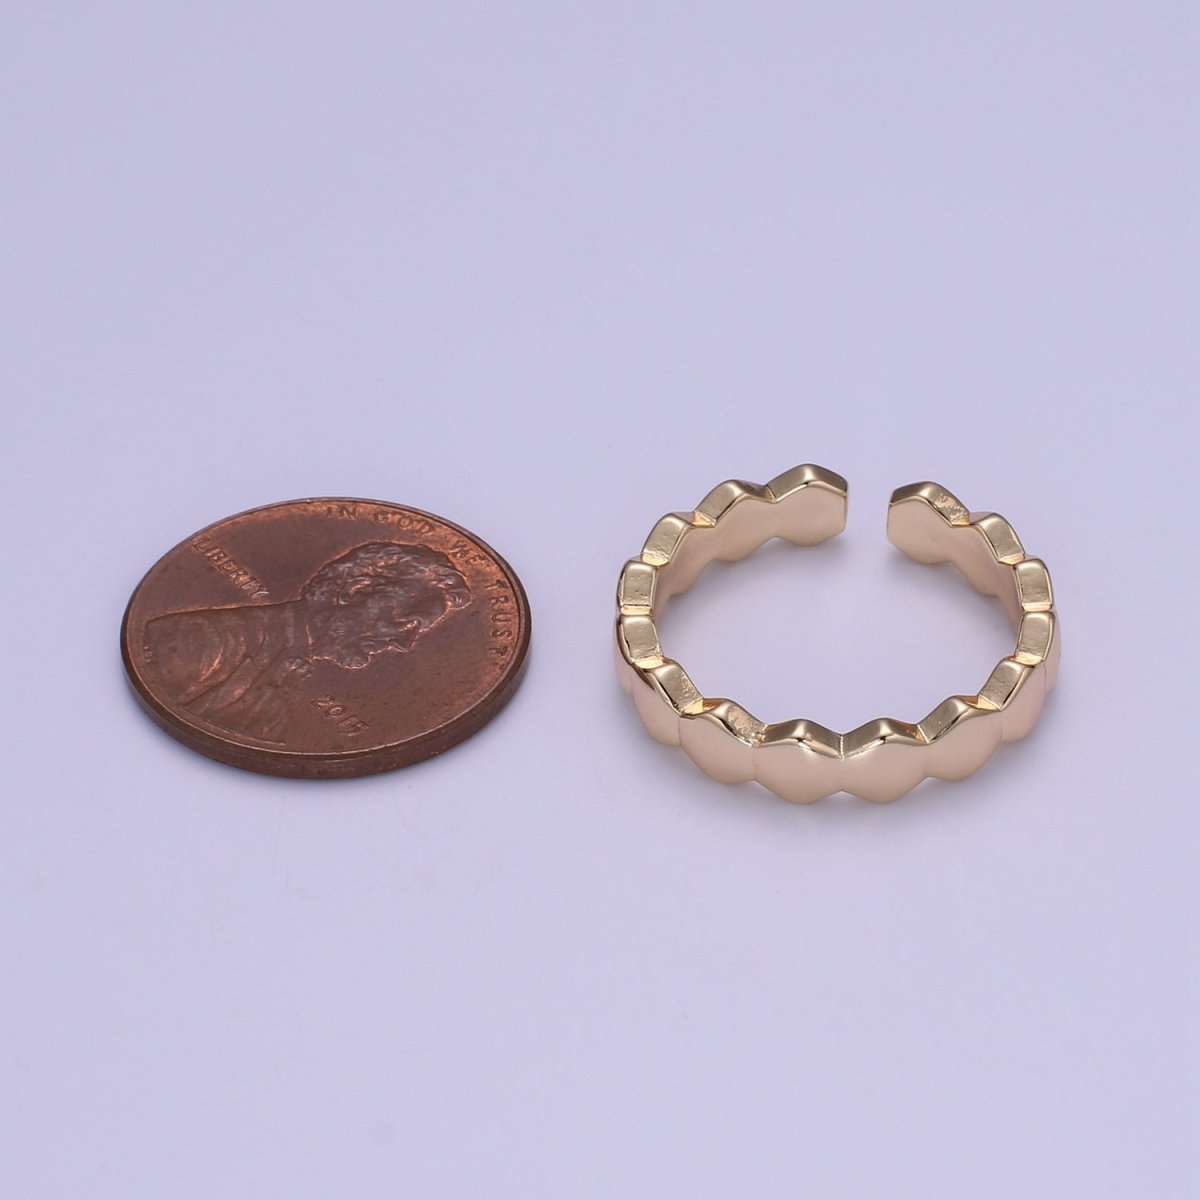 Gold Filled Hexagon Band Adjustable Ring O-322 - DLUXCA